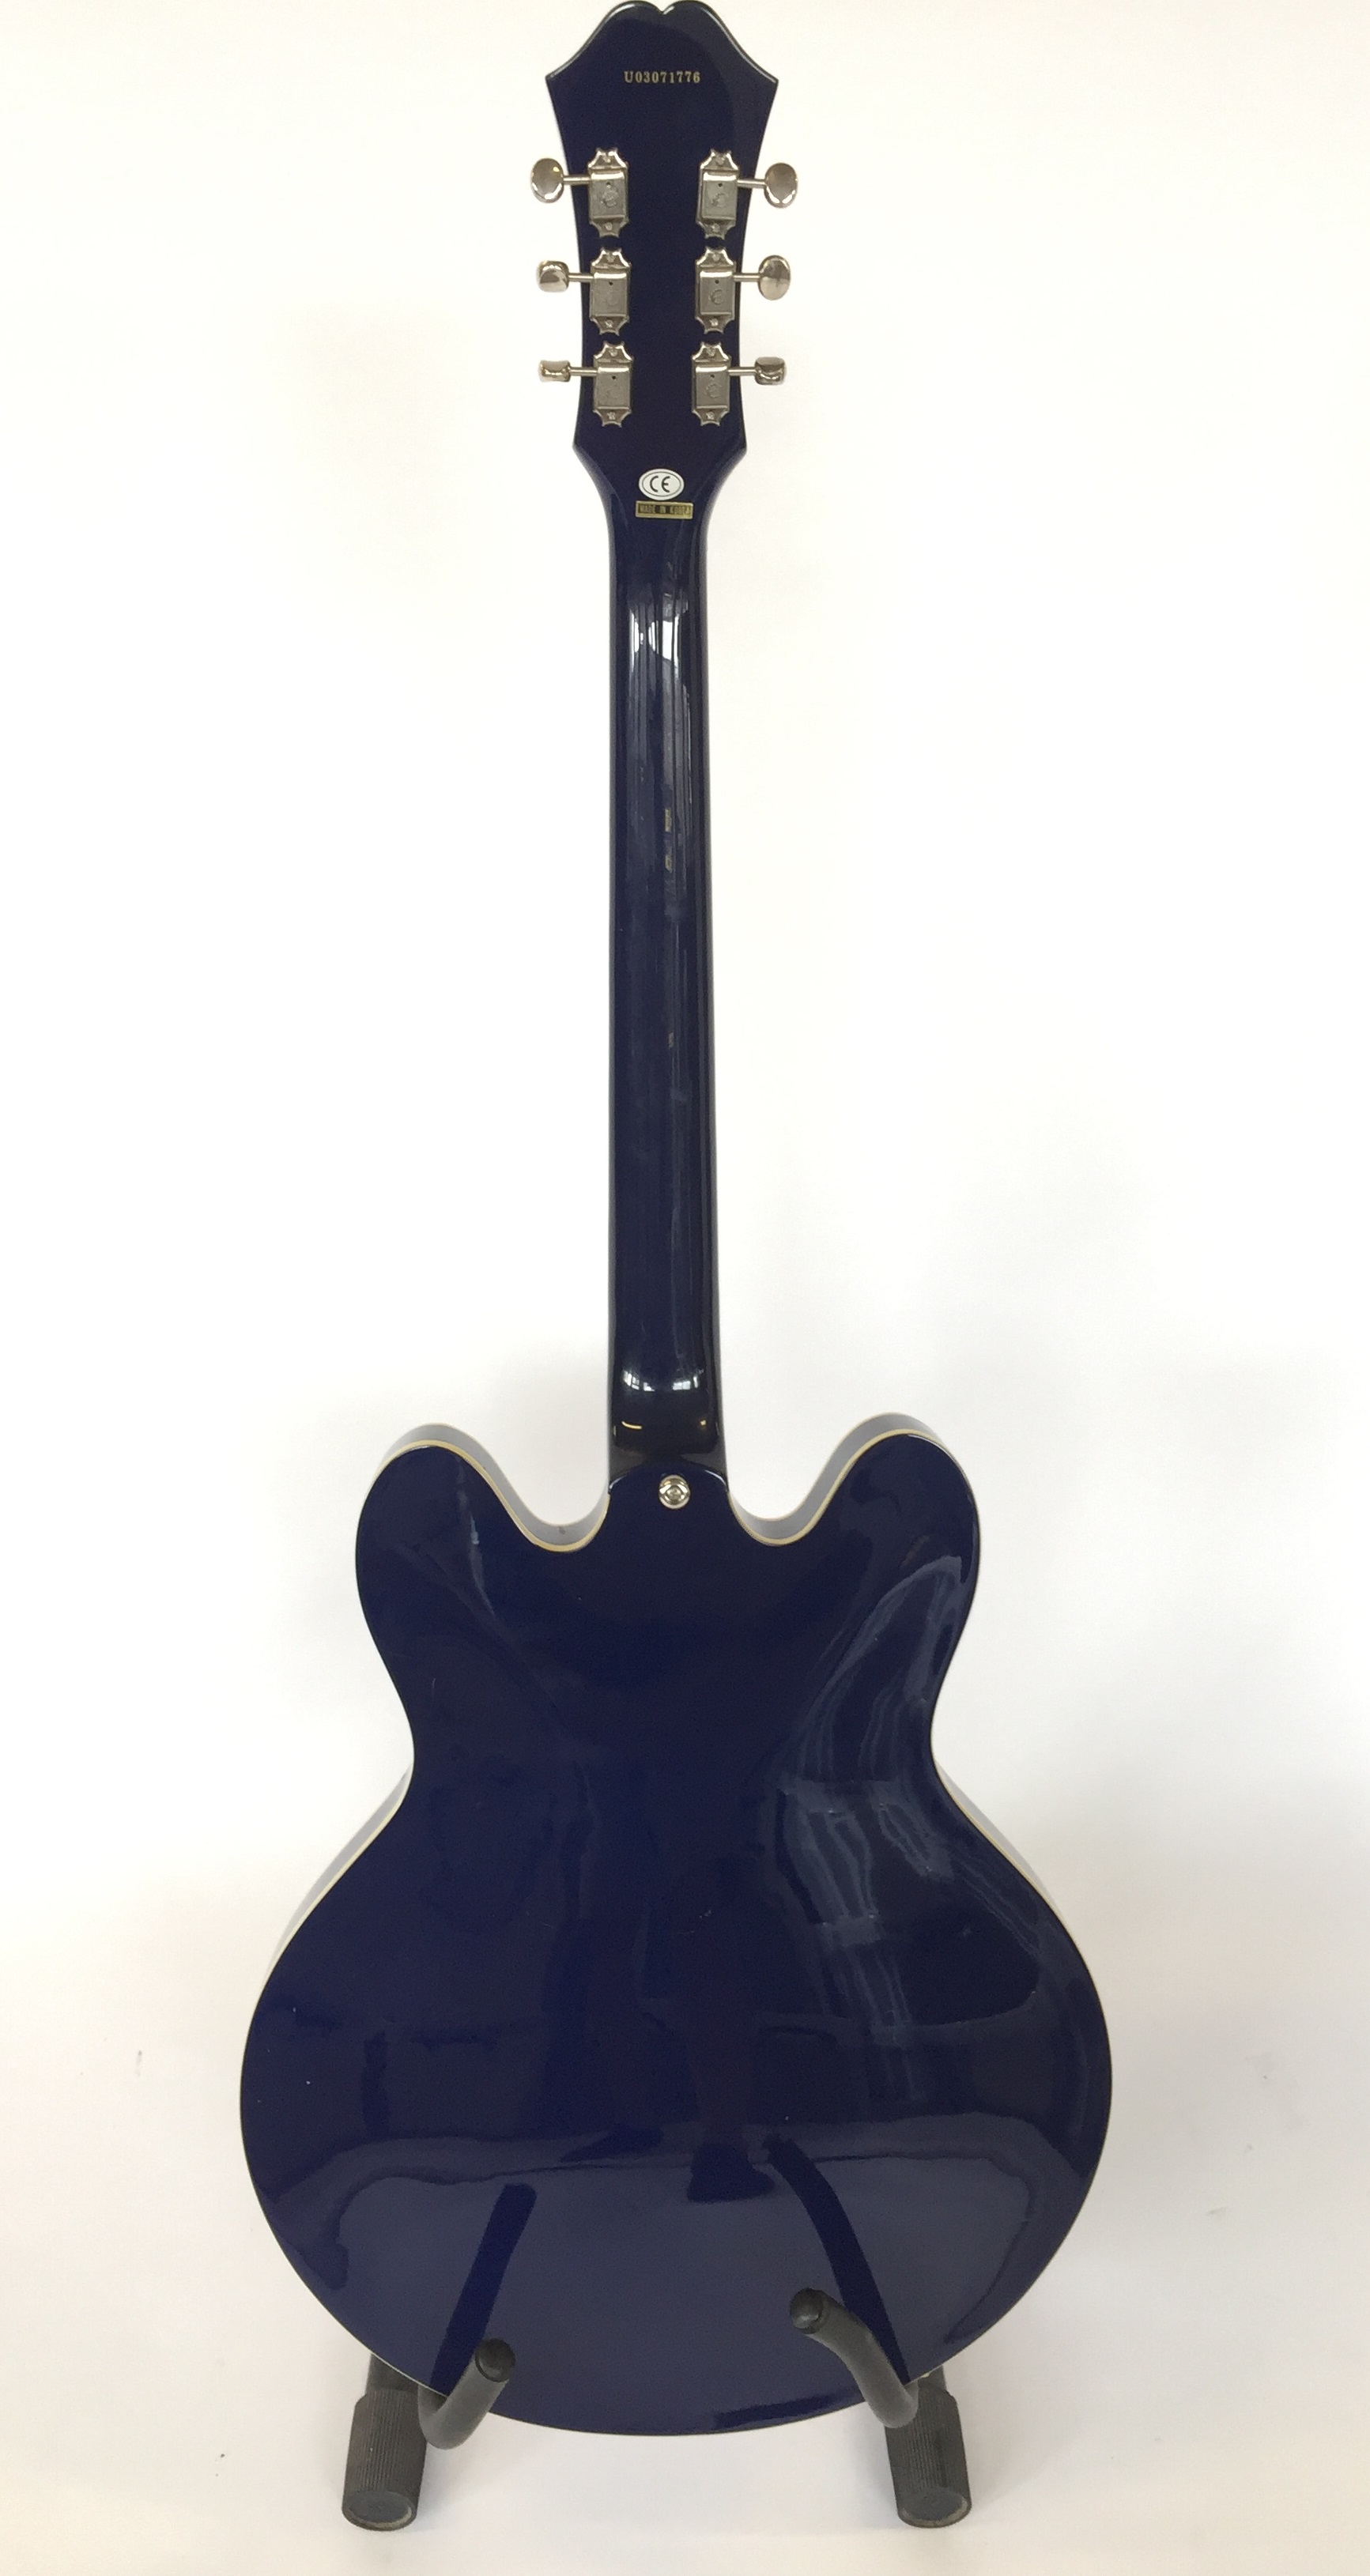 EPIPHONE NOEL GALLAGHER SUPERNOVA - electric guitar - a must for any guitar playing Oasis fan! - Image 5 of 8